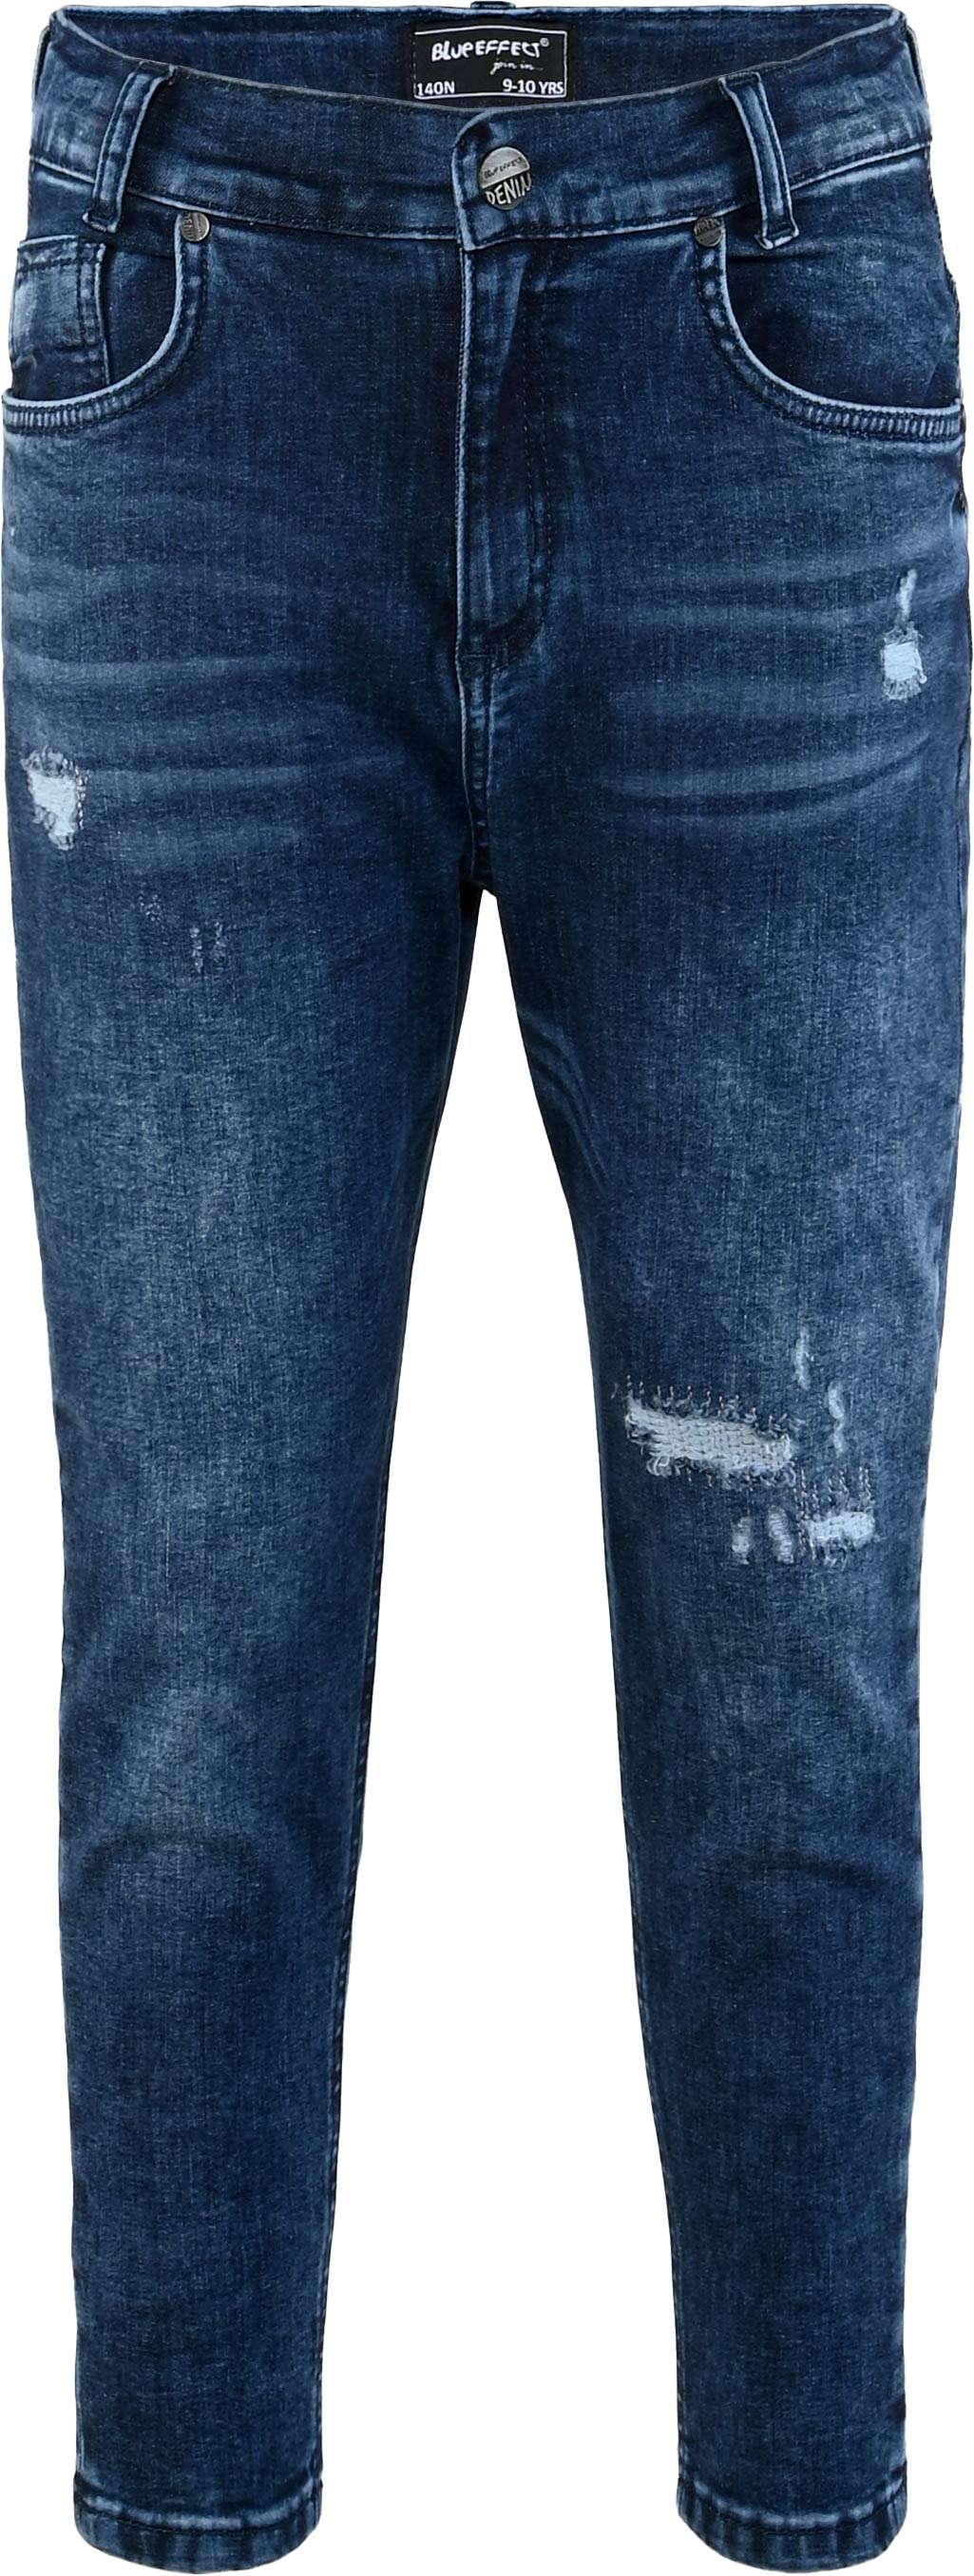 2813-NOS Boys Loose Fit Jeans  available in Slim,Normal